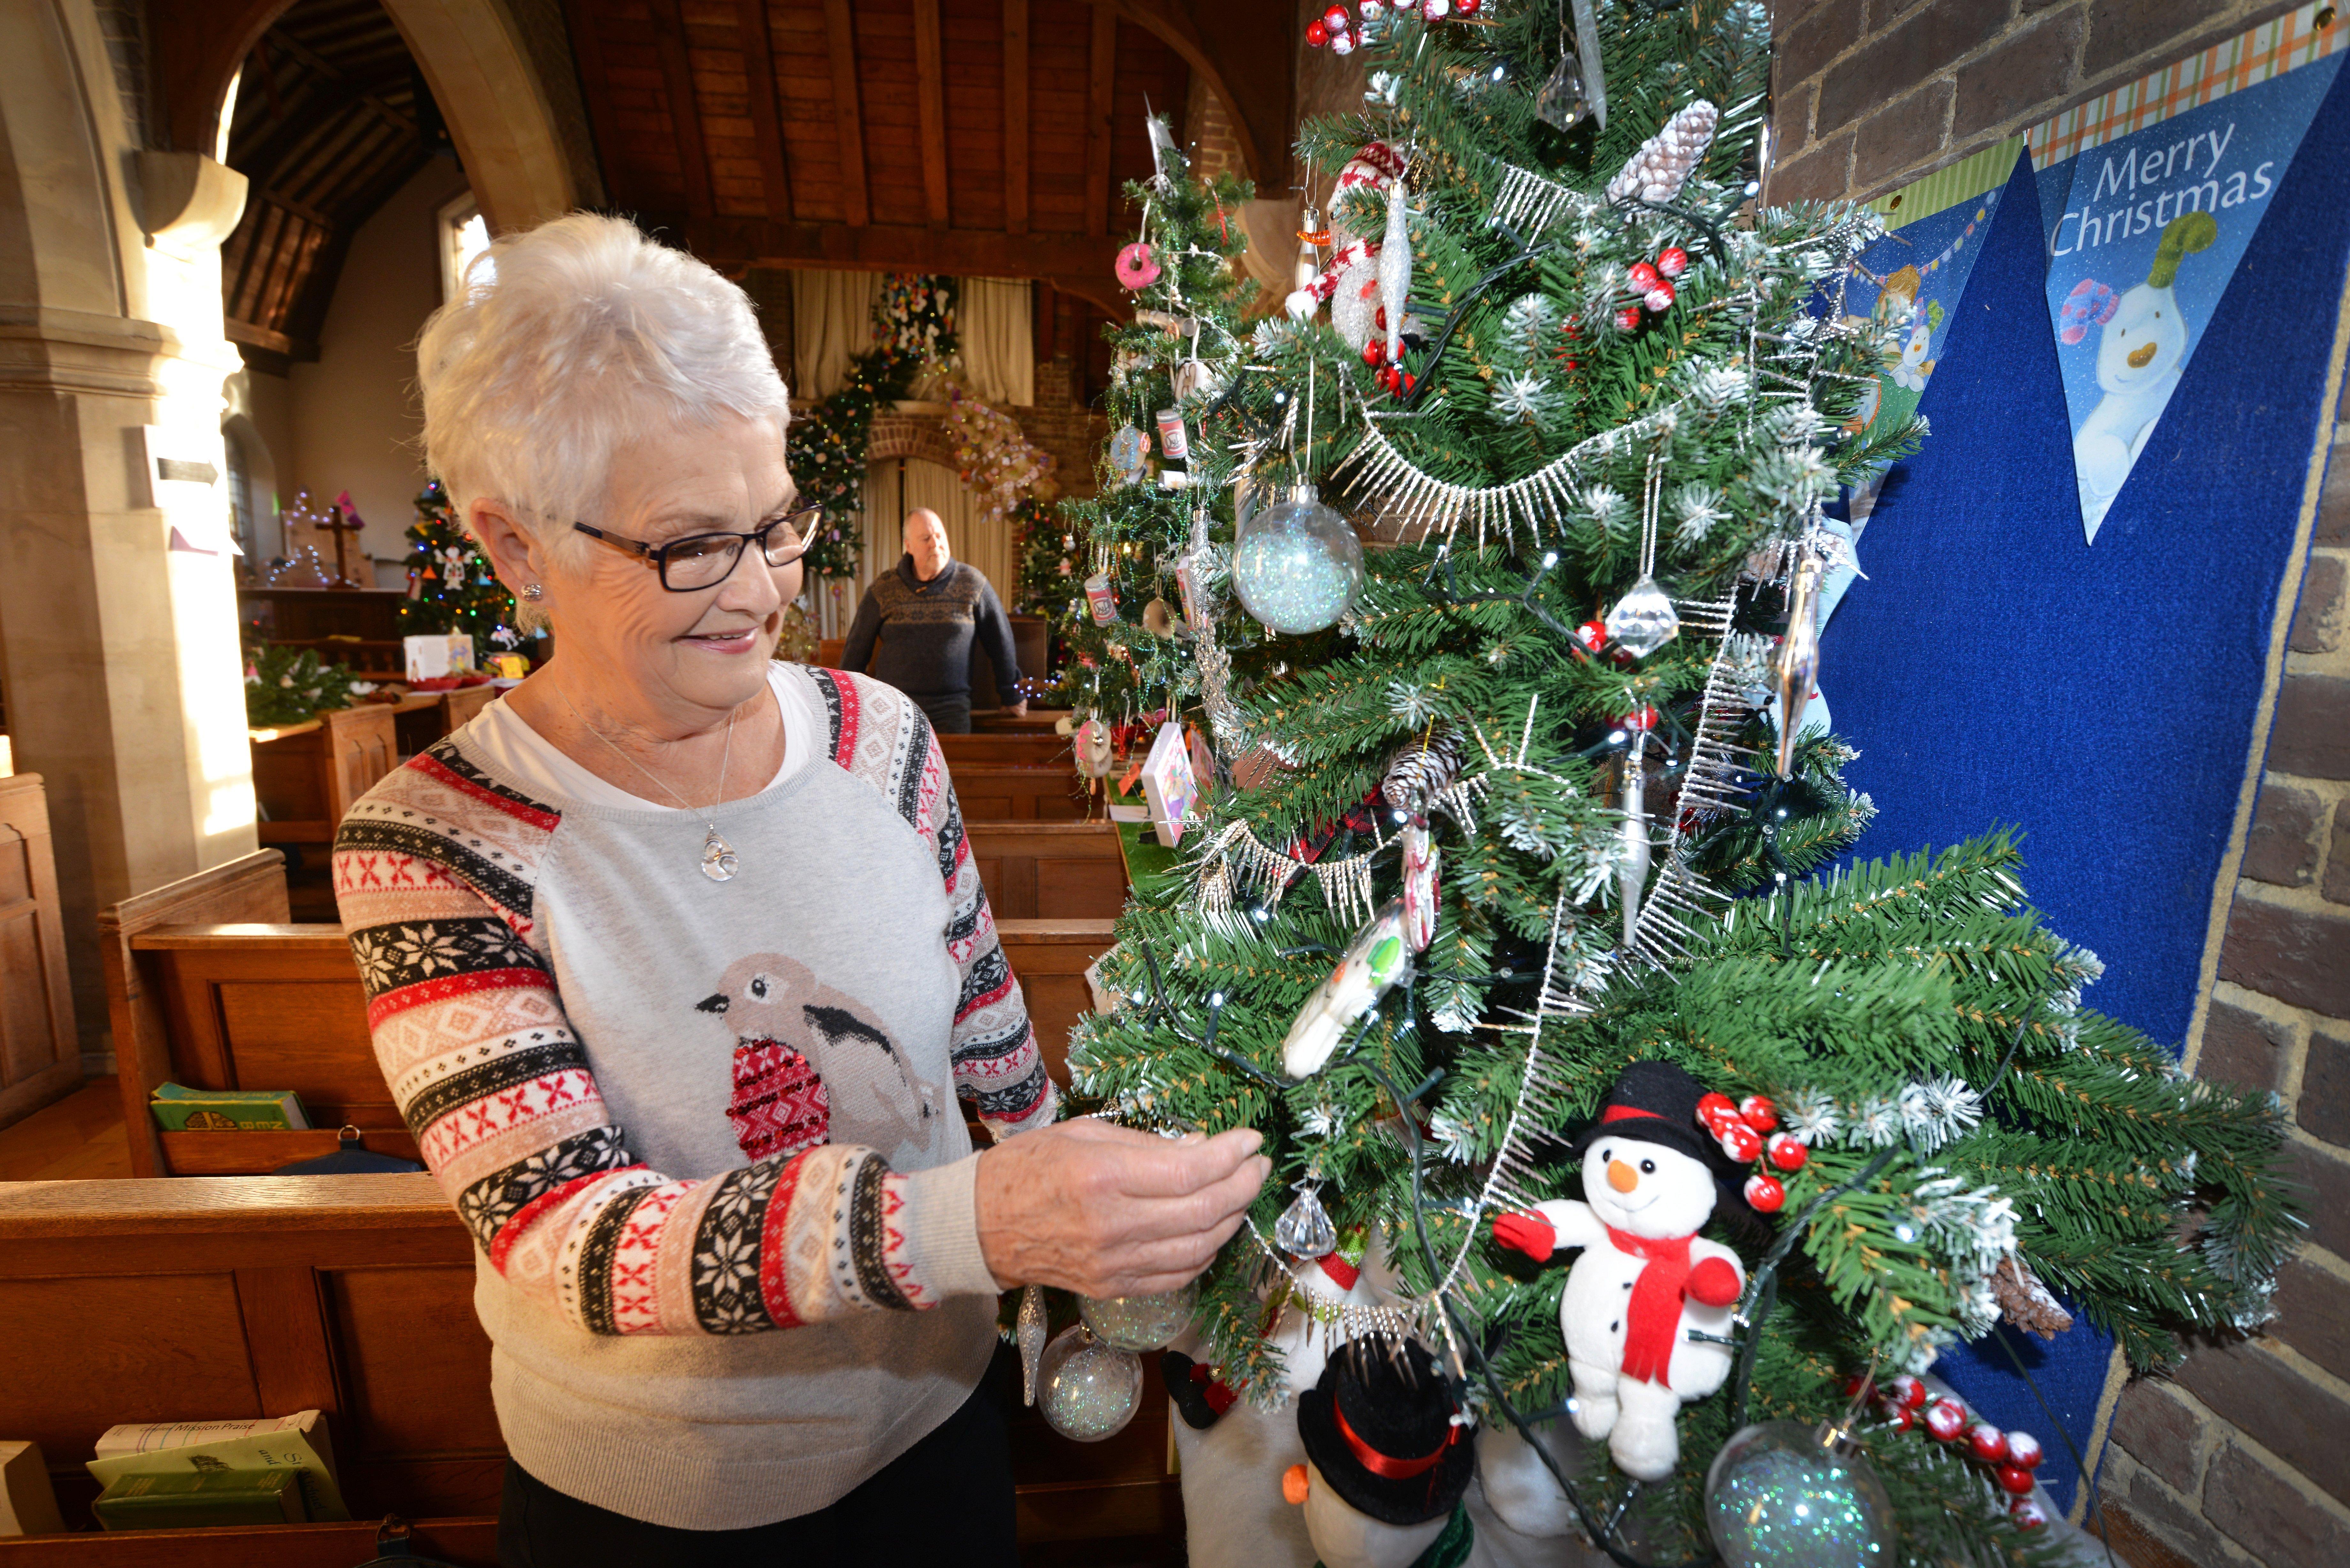 Christmas Tree Festival at St Michael & All Angels, Bexhill.

Jill Andrews SUS-190112-114003001